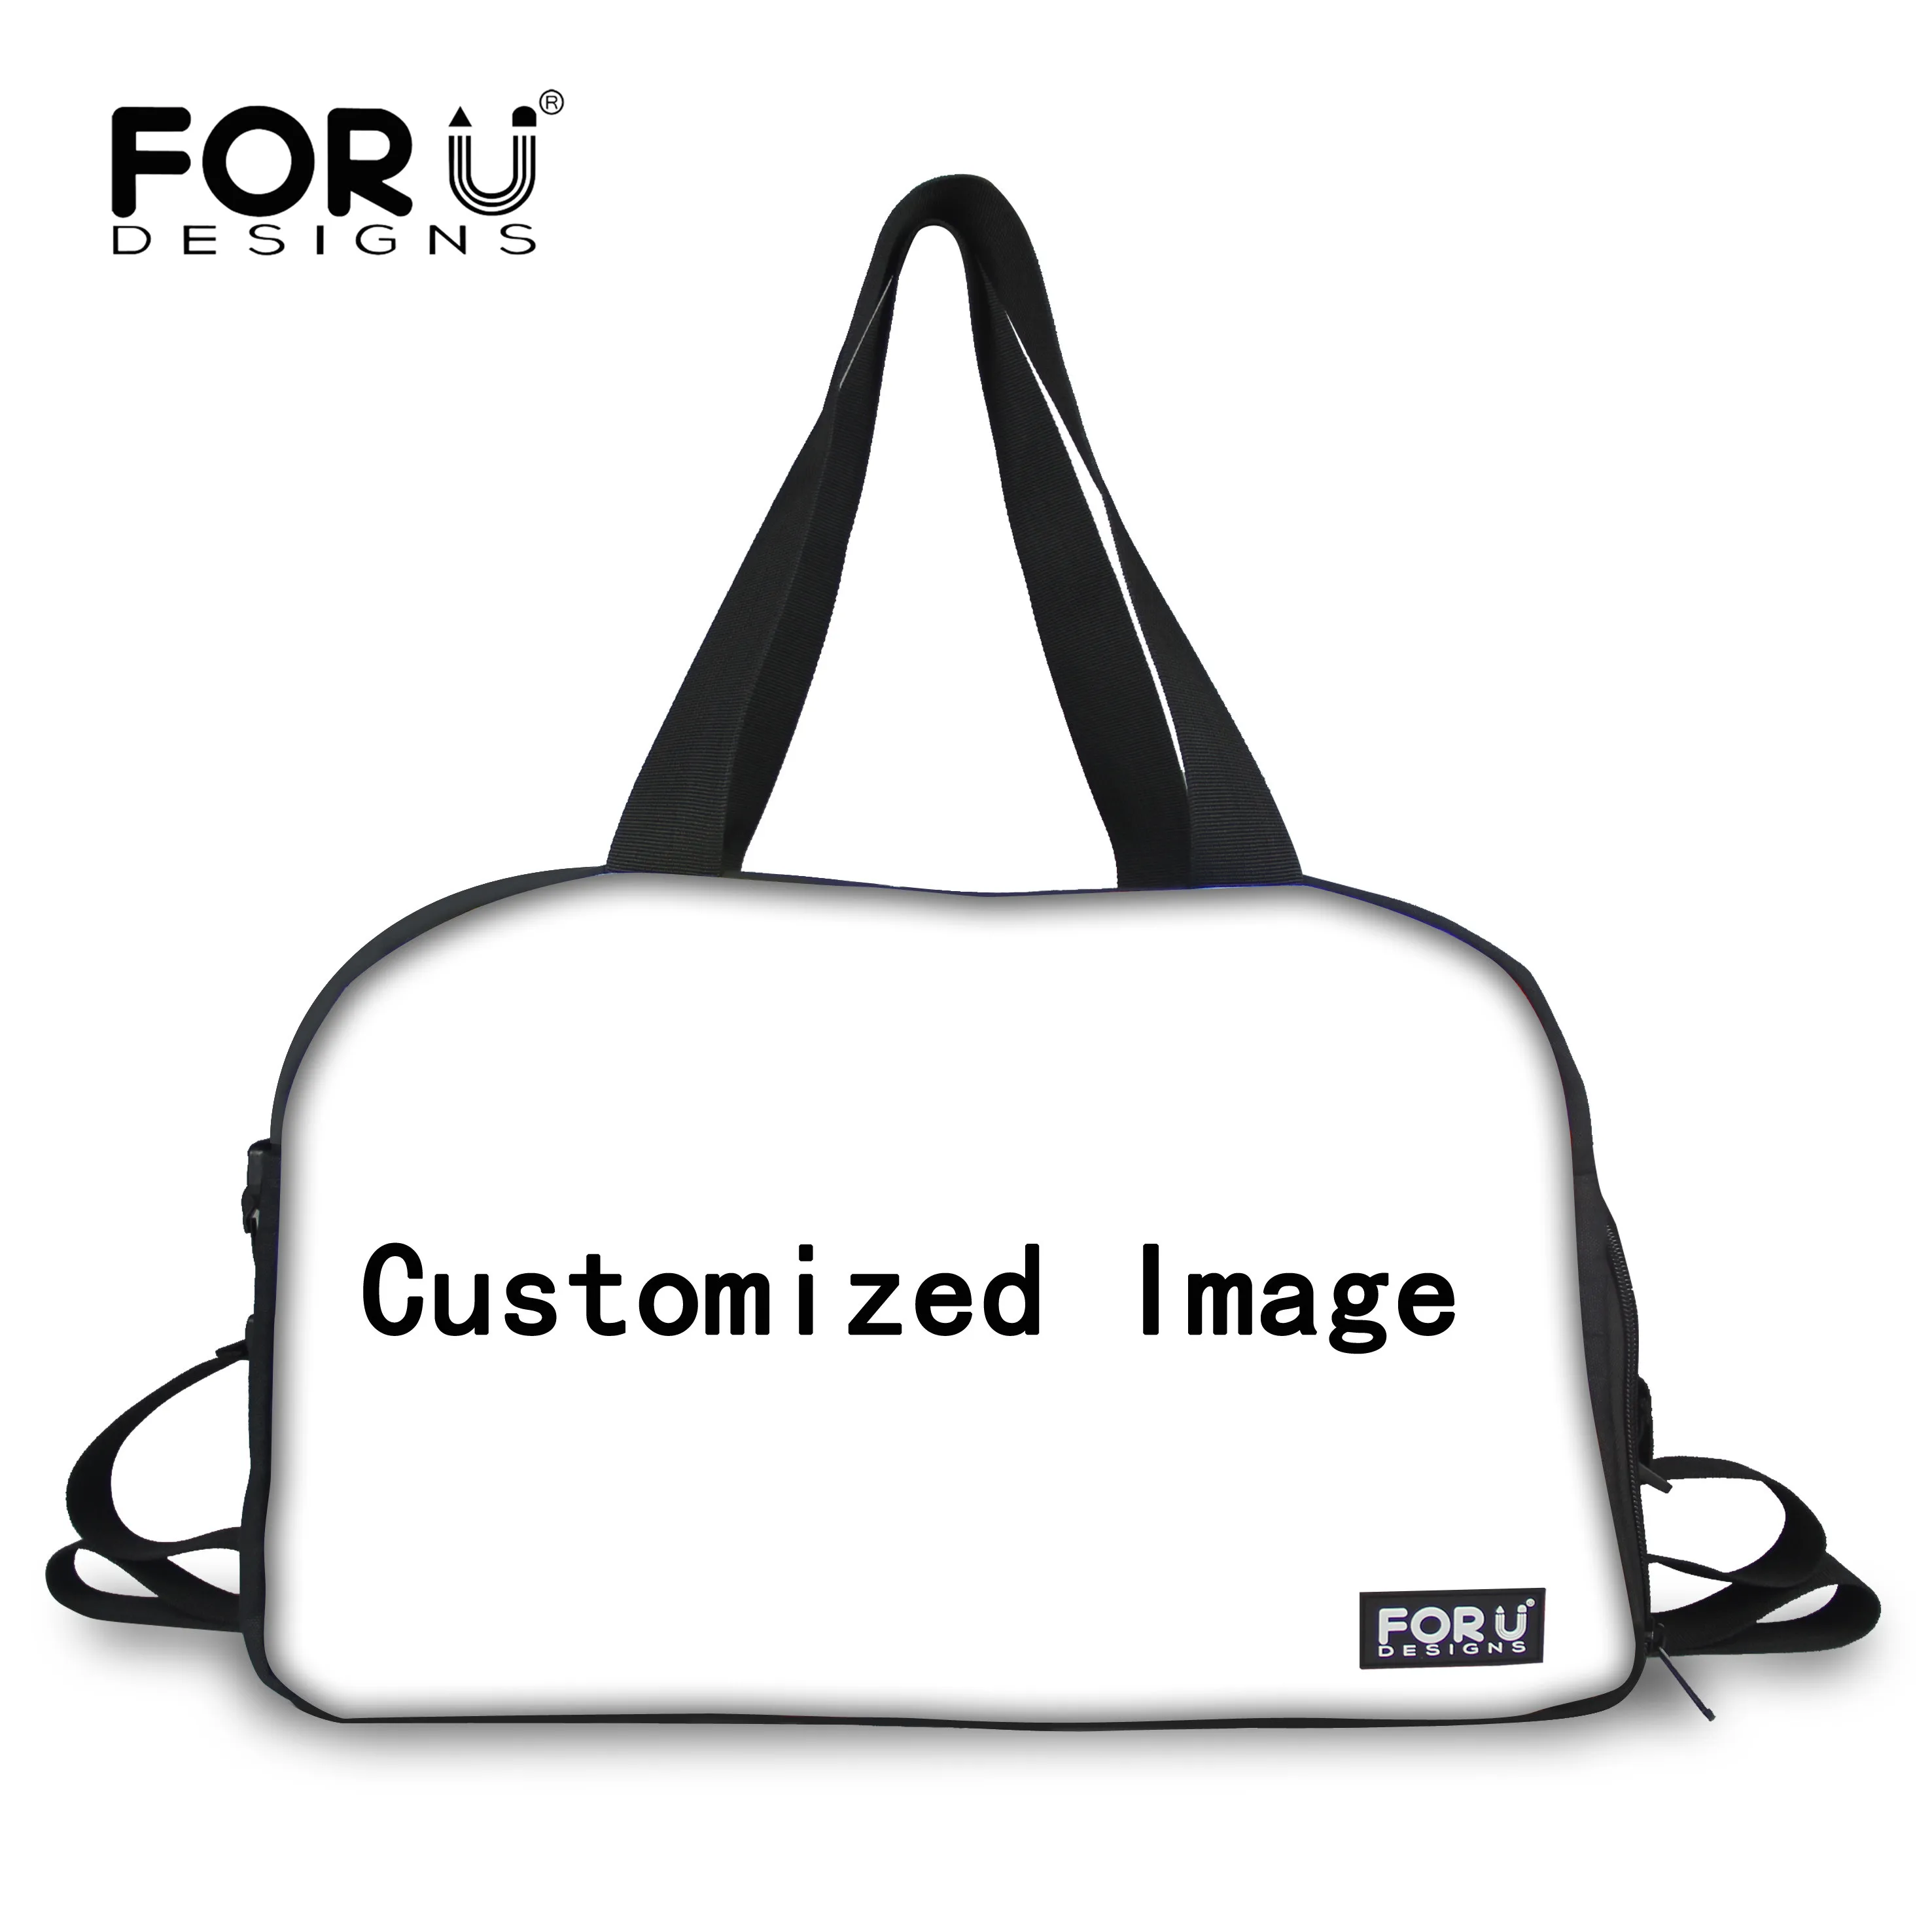 FORUDESIGNS PU Shoulder Bags Customized with Own Logo Printing Women Handbags and Purses Wallet Casual Large Bolsos Mujer - Color: travel bag T